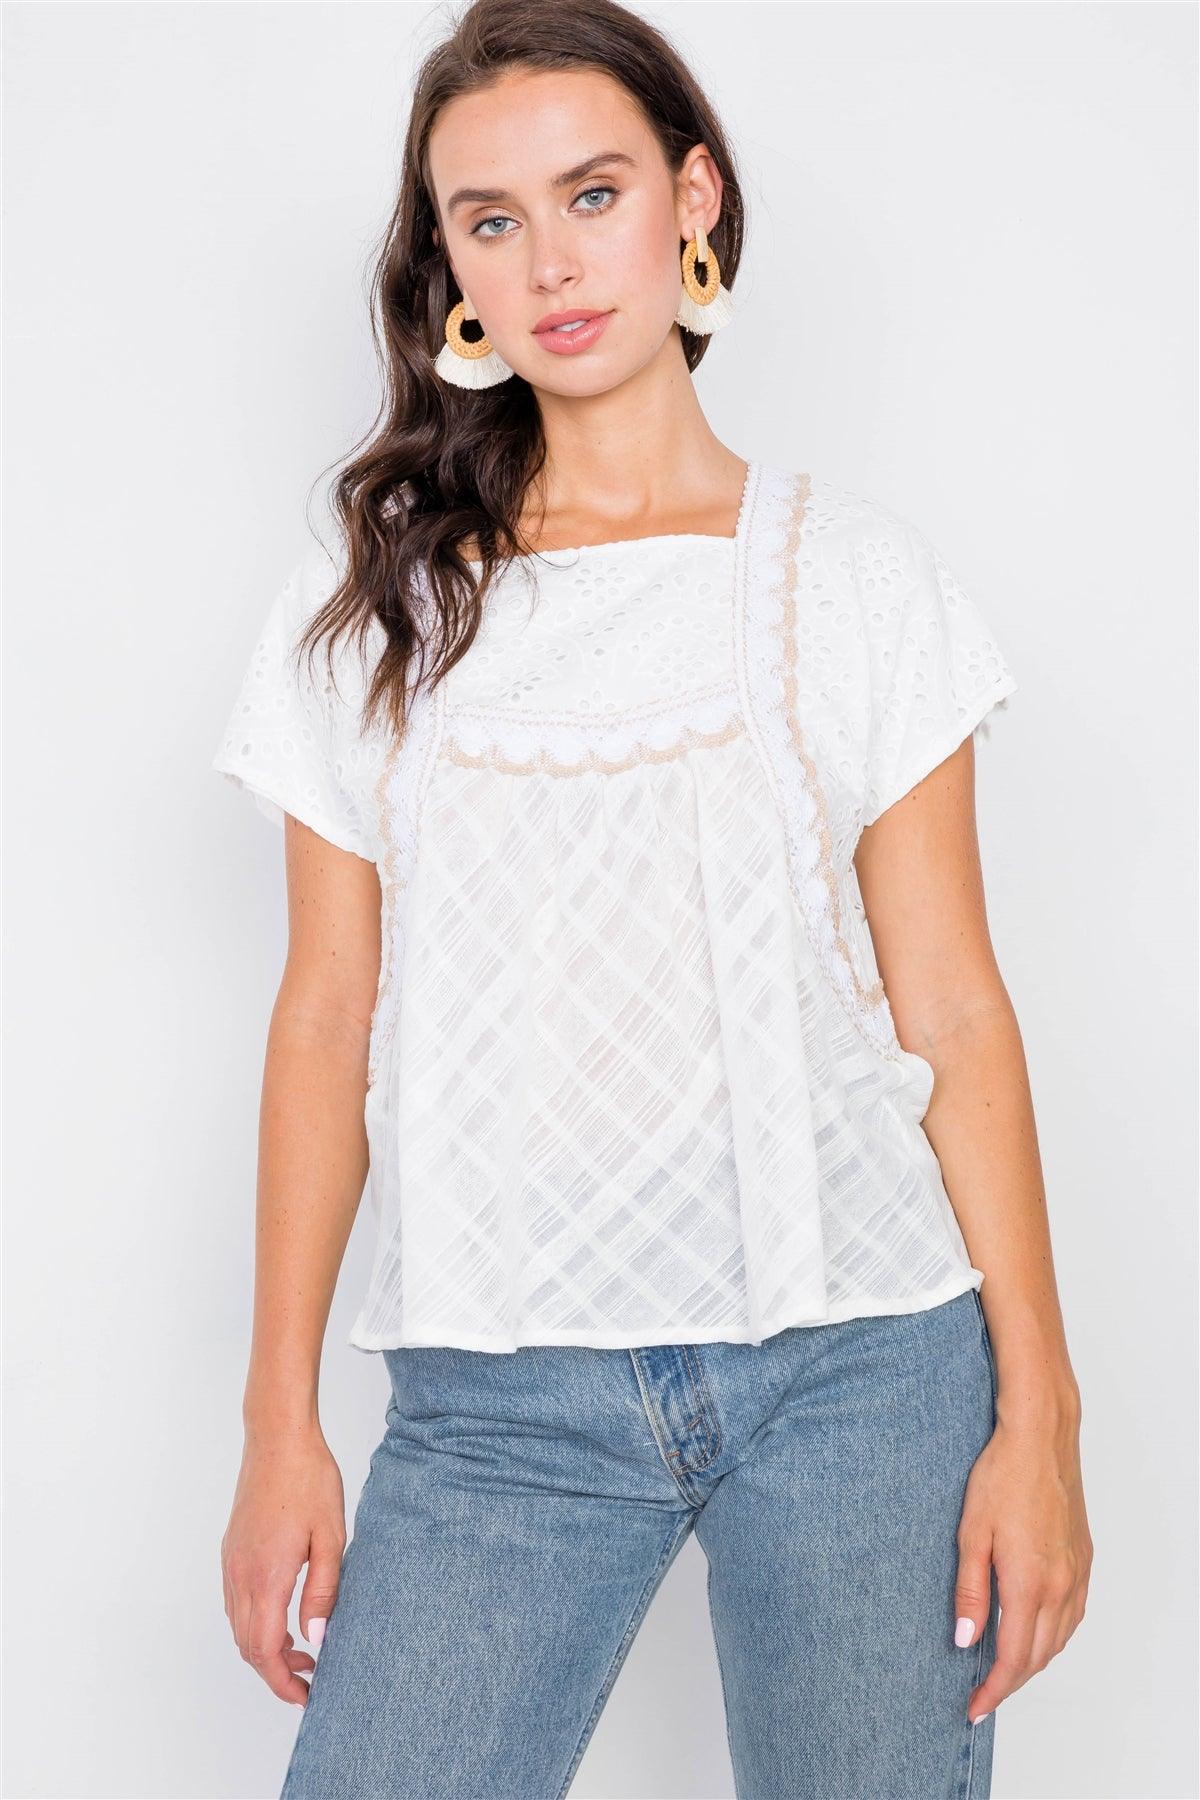 Ivory Floral Eyelet Square Neck High-Low Top